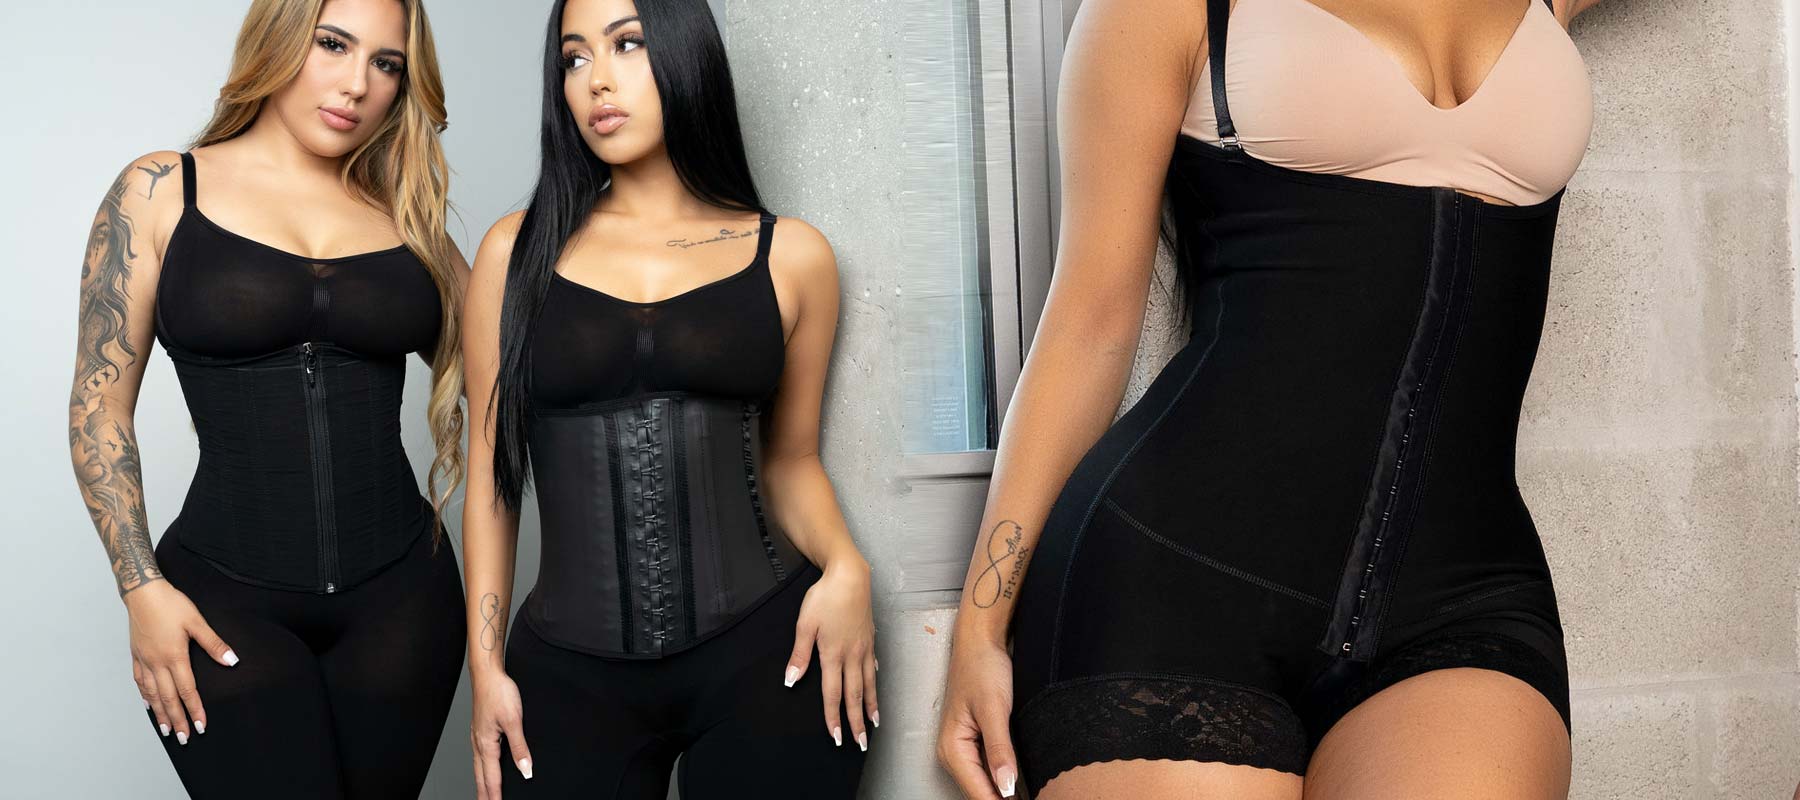 ANGEL CURVES Gym Waist Trainer XL Excellent Preowned Condition